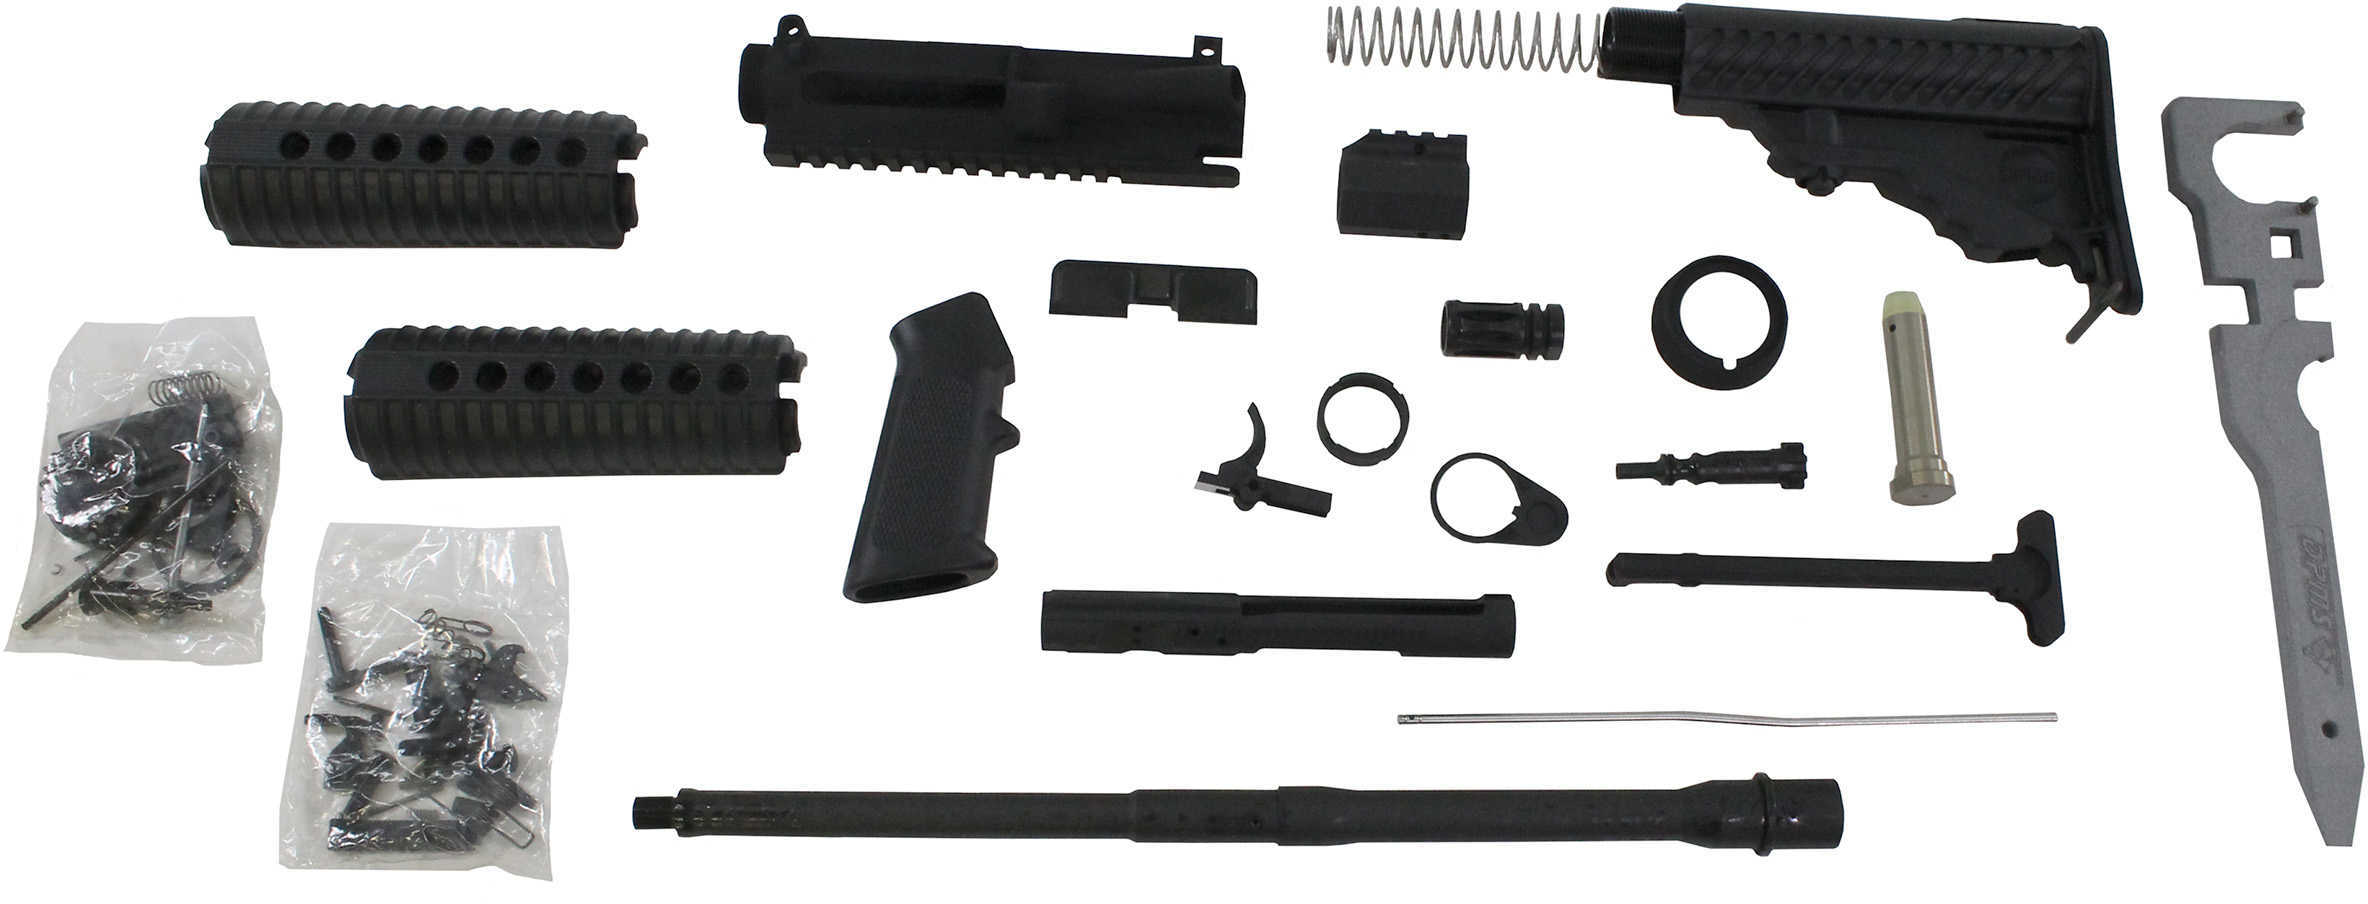 DPMS Oracle AR-15 Rifle Build Kit, Carbine Gas System, Flat-Top Upper